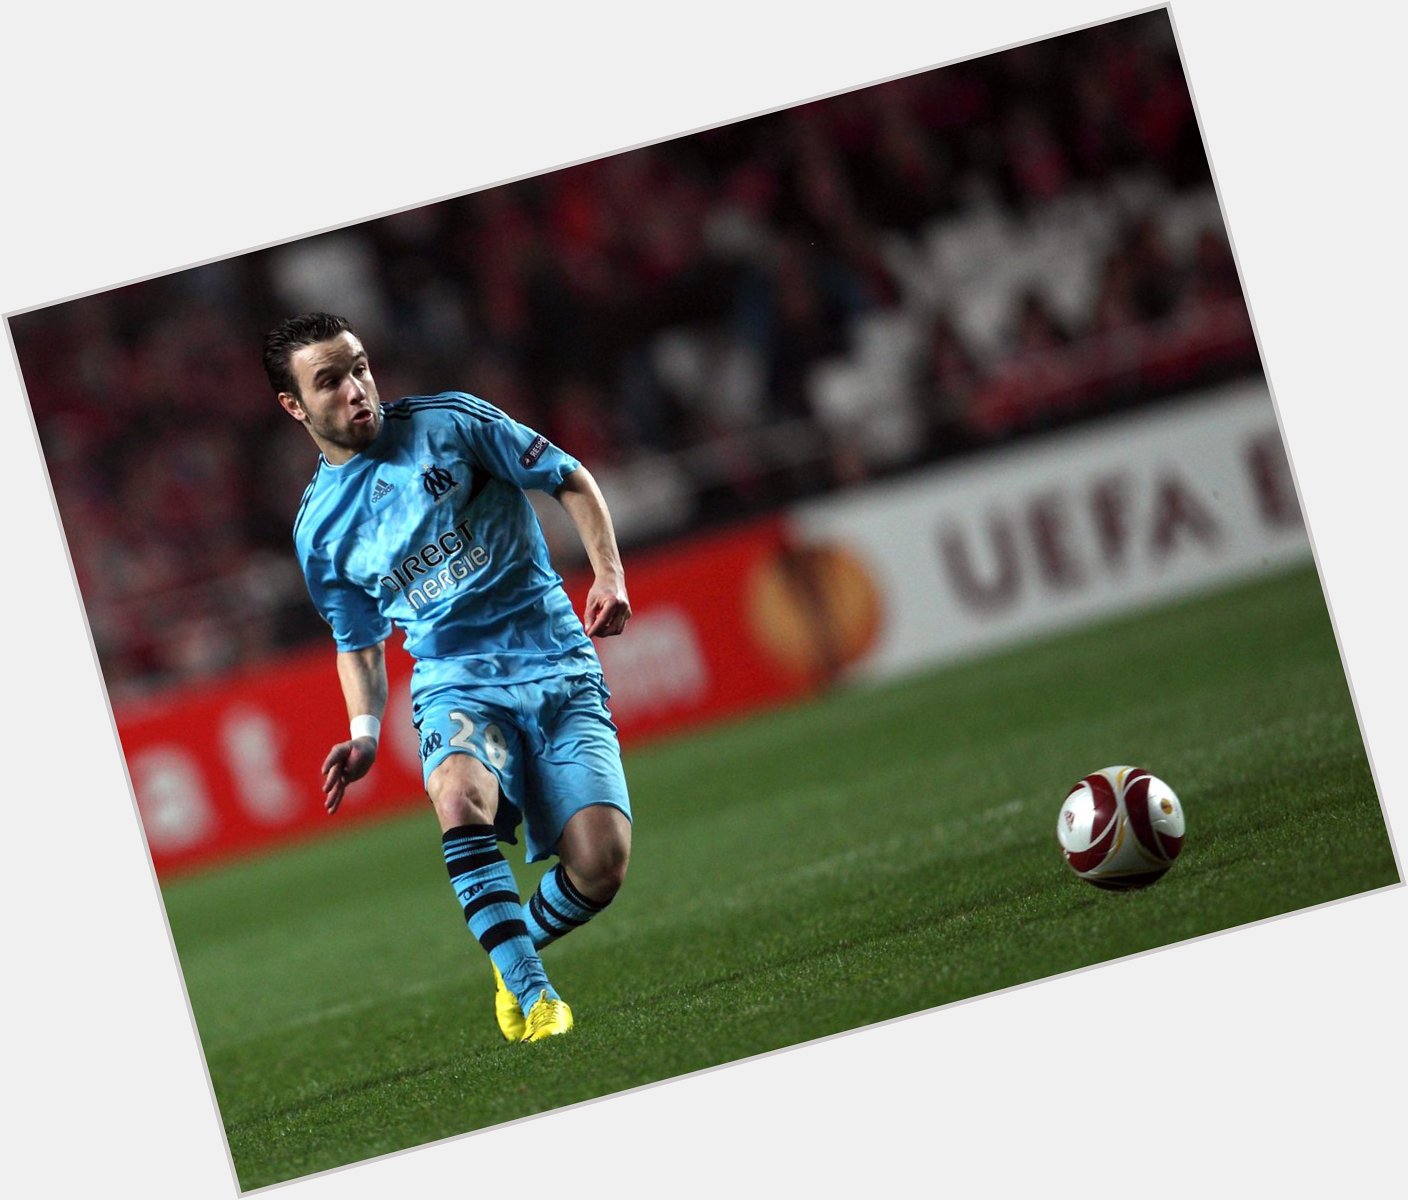 EuropaLeague: Happy birthday, Mathieu Valbuena!  Where has he played his best football? 